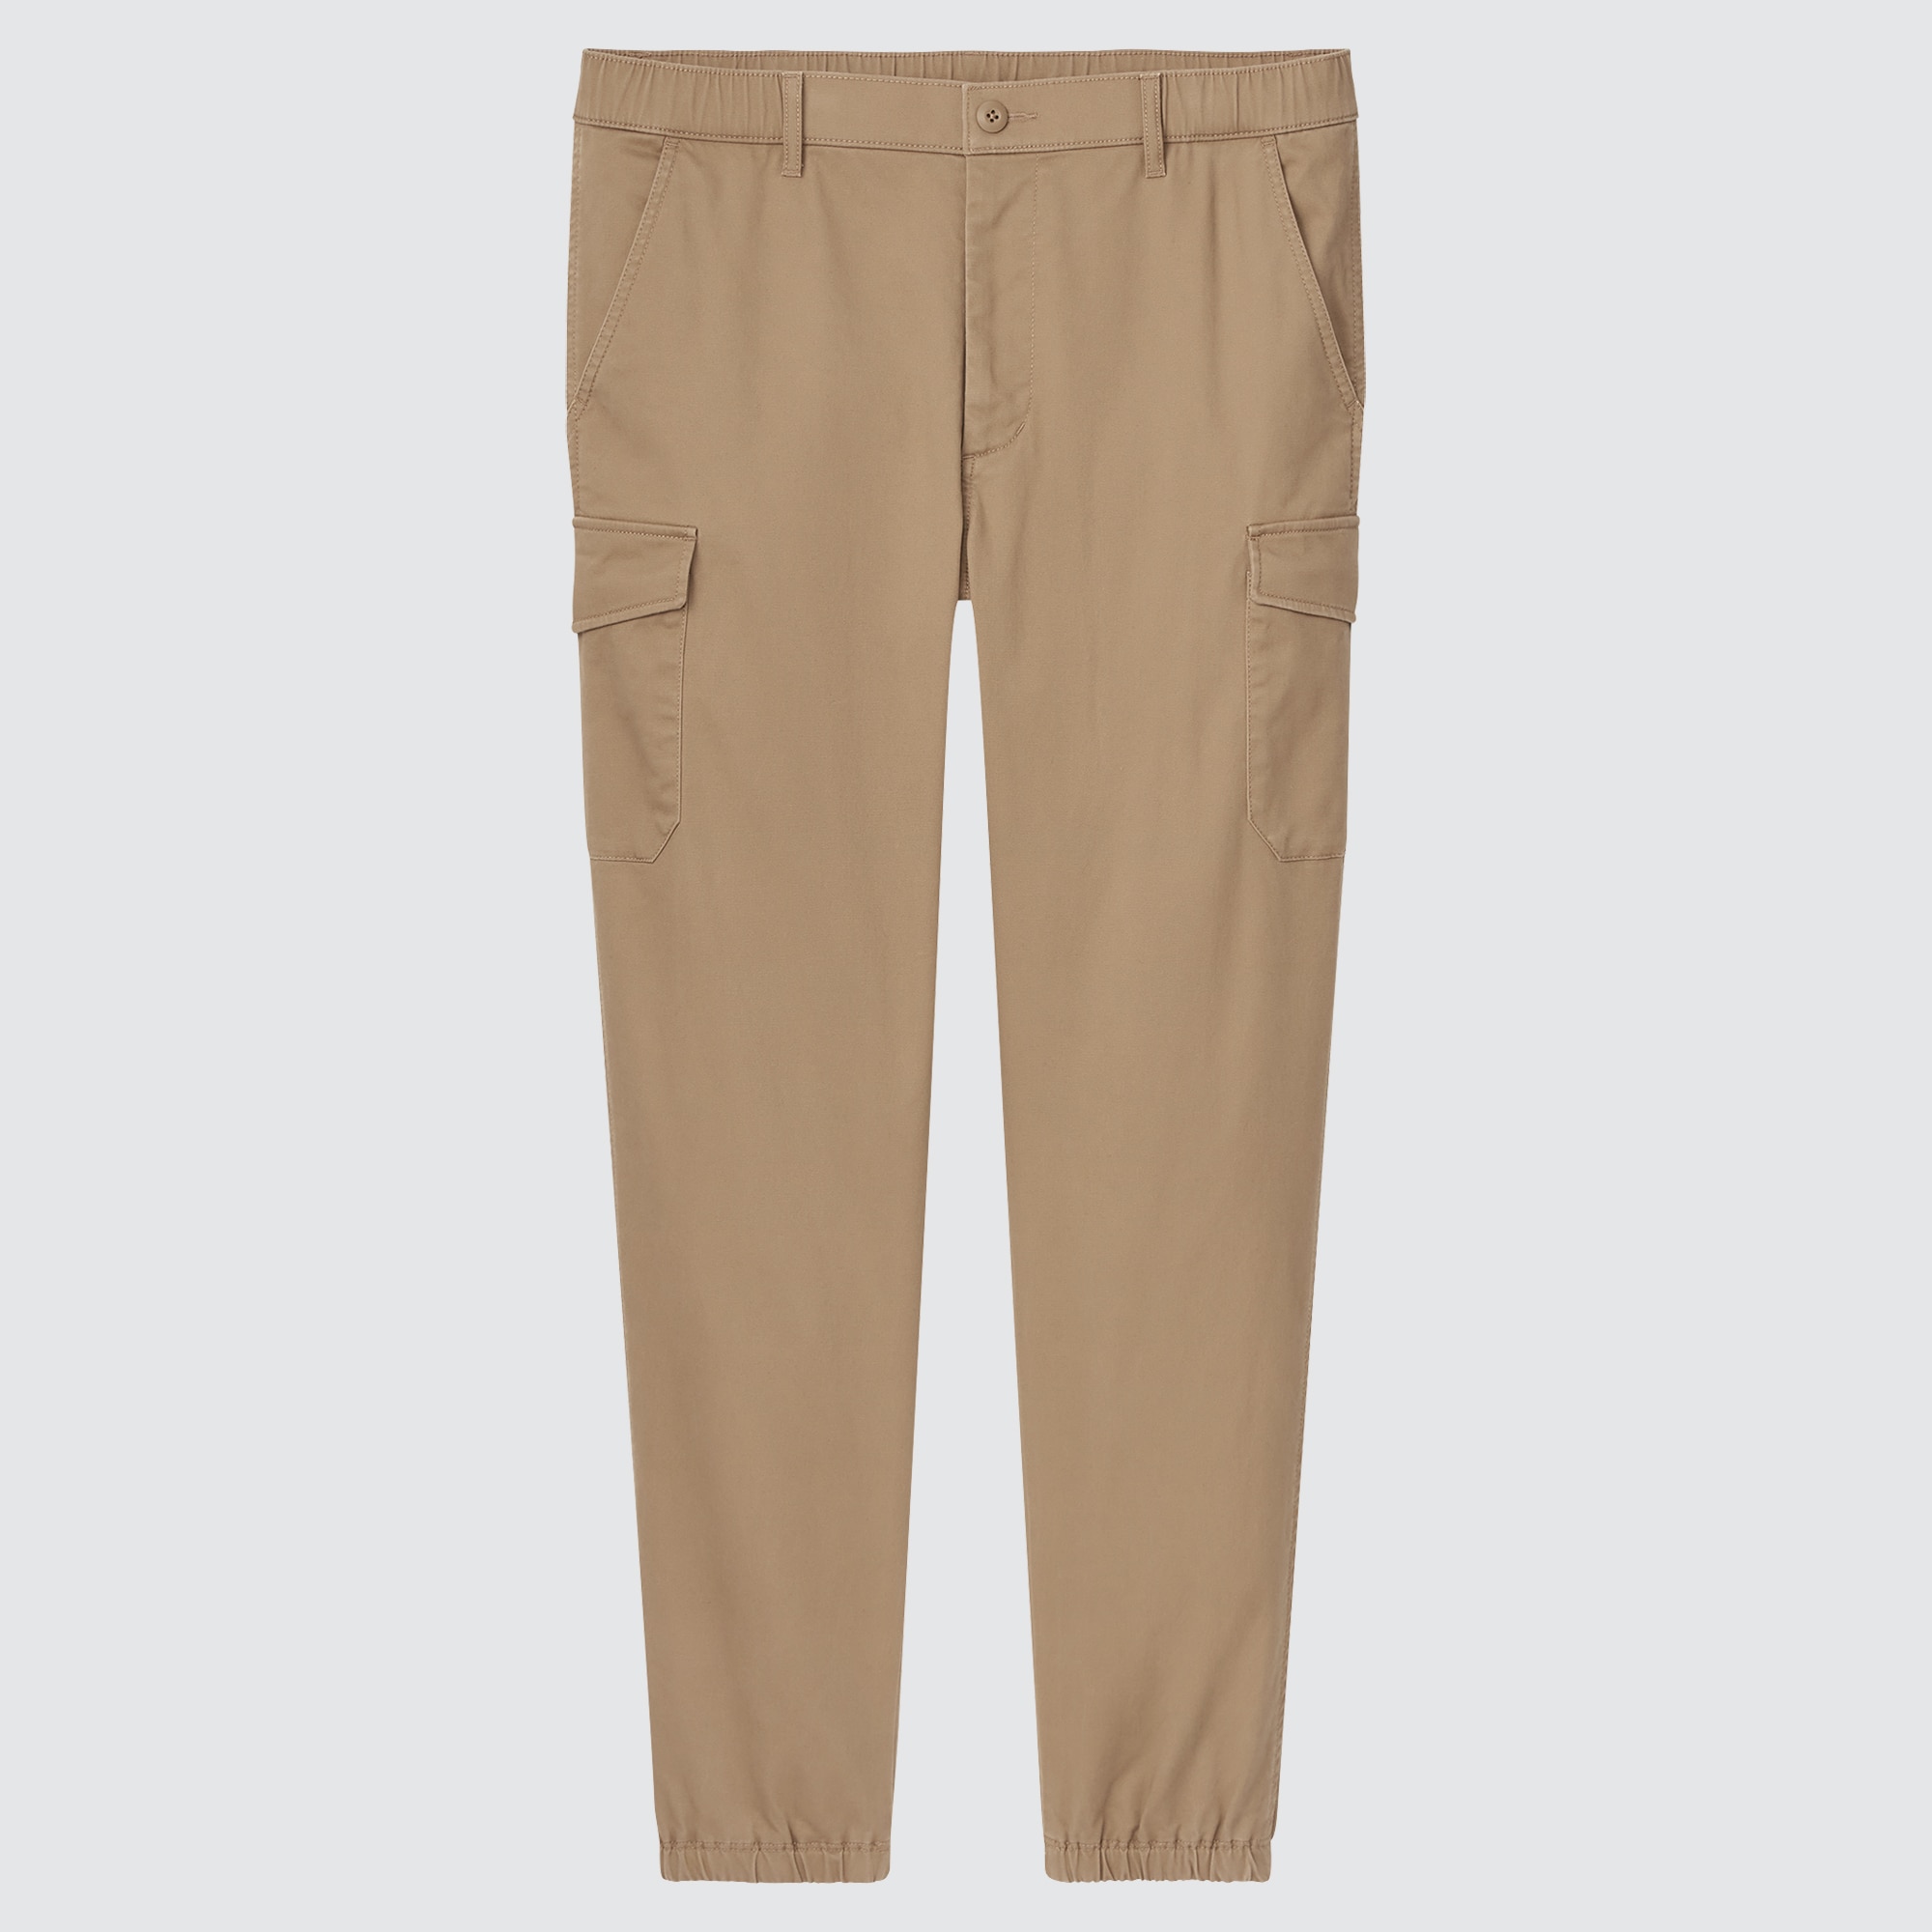 Cargo pants for hiking, Magic jeans for shopping, or casual pants